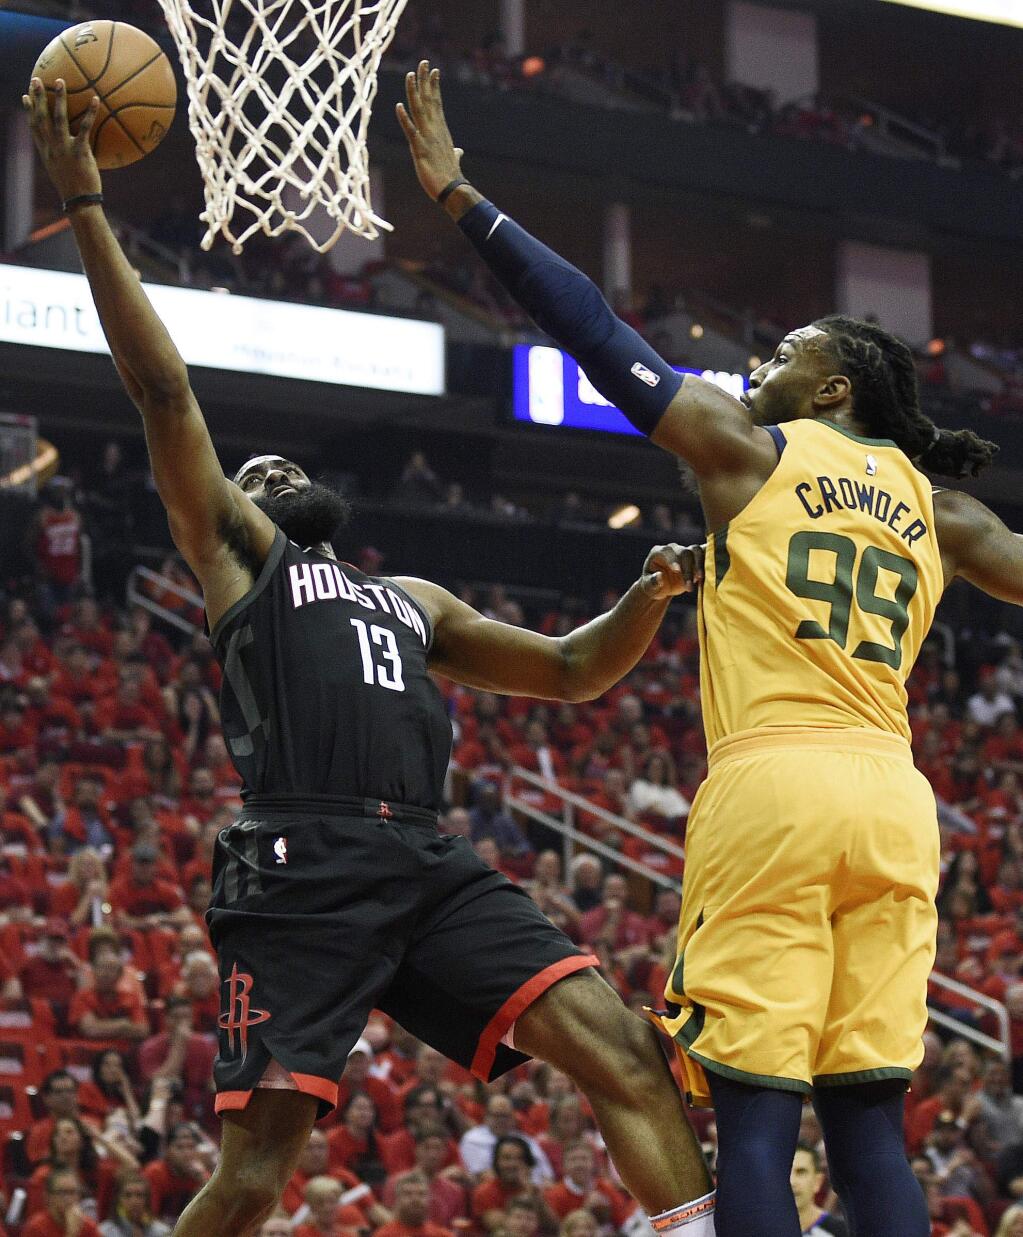 Houston Rockets guard James Harden drives to the basket as Utah Jazz forward Jae Crowder defends during the first half in Game 1 of a second-round playoff series, Sunday, April 29, 2018, in Houston. (AP Photo/Eric Christian Smith)